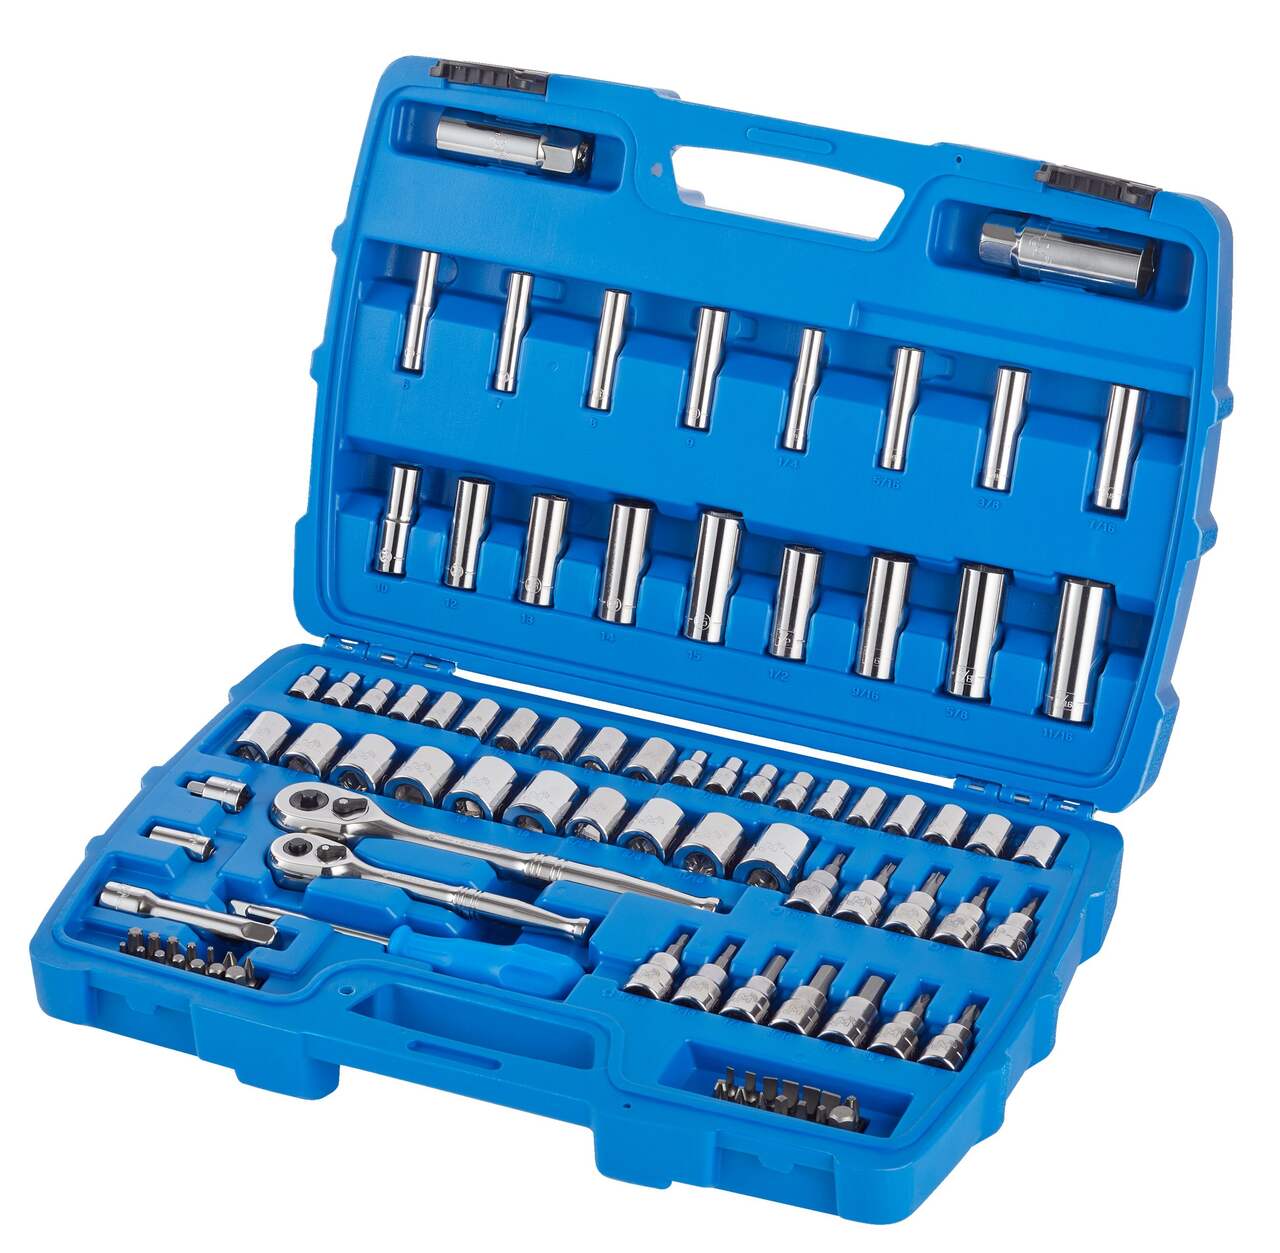 https://media-www.canadiantire.ca/product/fixing/tools/sockets-wrenches/0589215/mastercraft-95-piece-socket-set-8dc5b002-5241-4390-9f43-6f1e7d8b48b5-jpgrendition.jpg?imdensity=1&imwidth=640&impolicy=mZoom